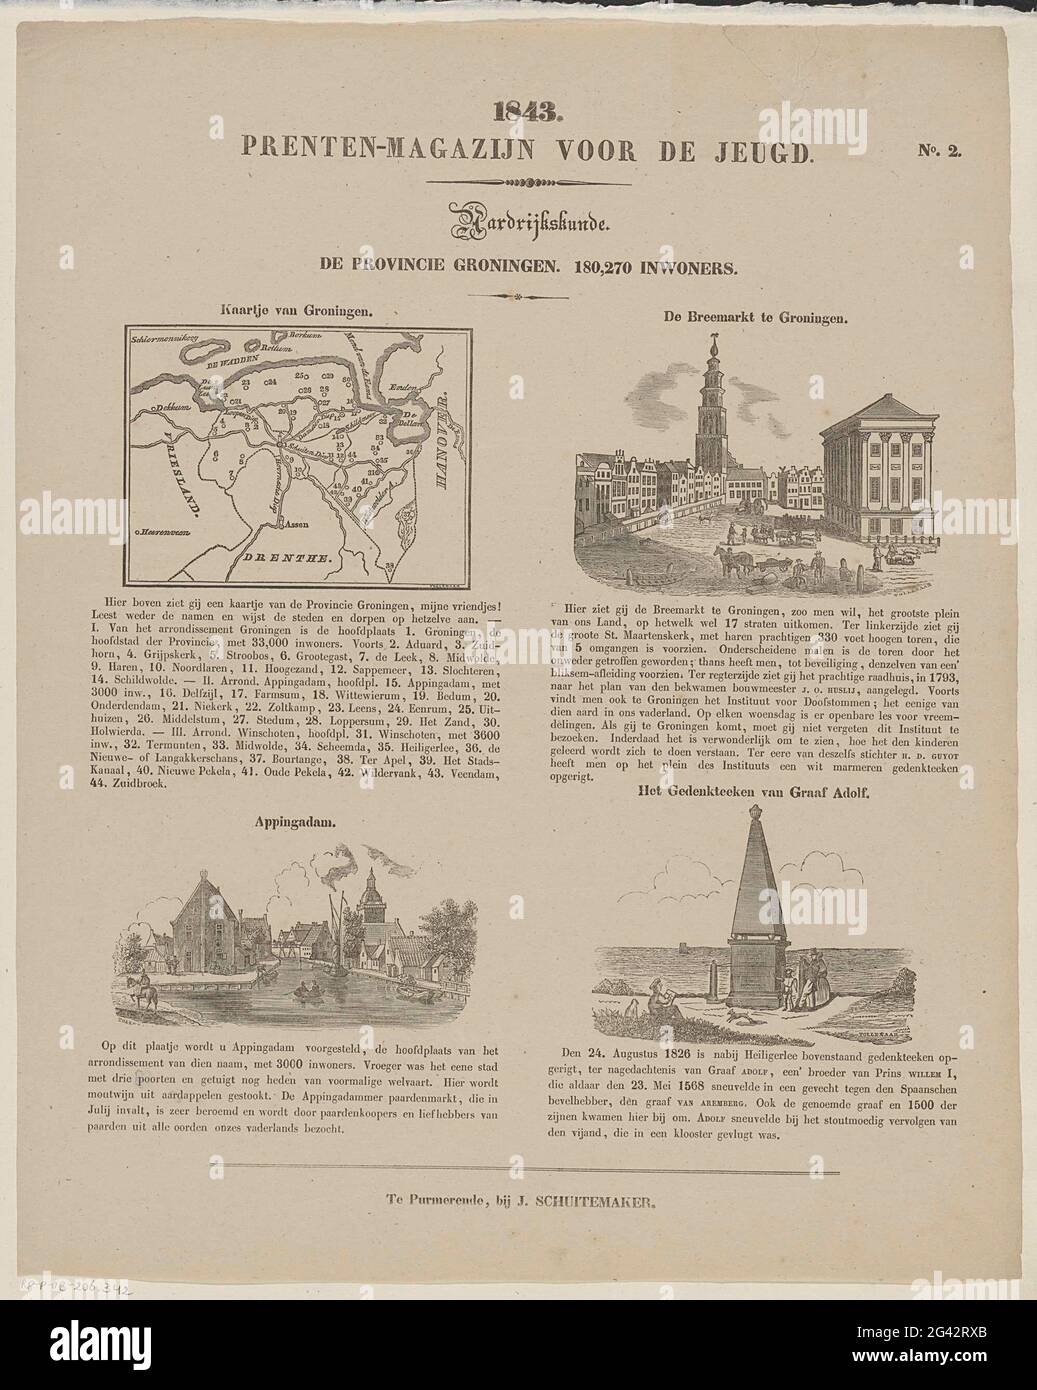 The province of Groningen. 180,270 inhabitants; Print warehouse for the youth; Geography. Leaf with 4 about the province of with a map and important buildings and monuments: the Grote Markt